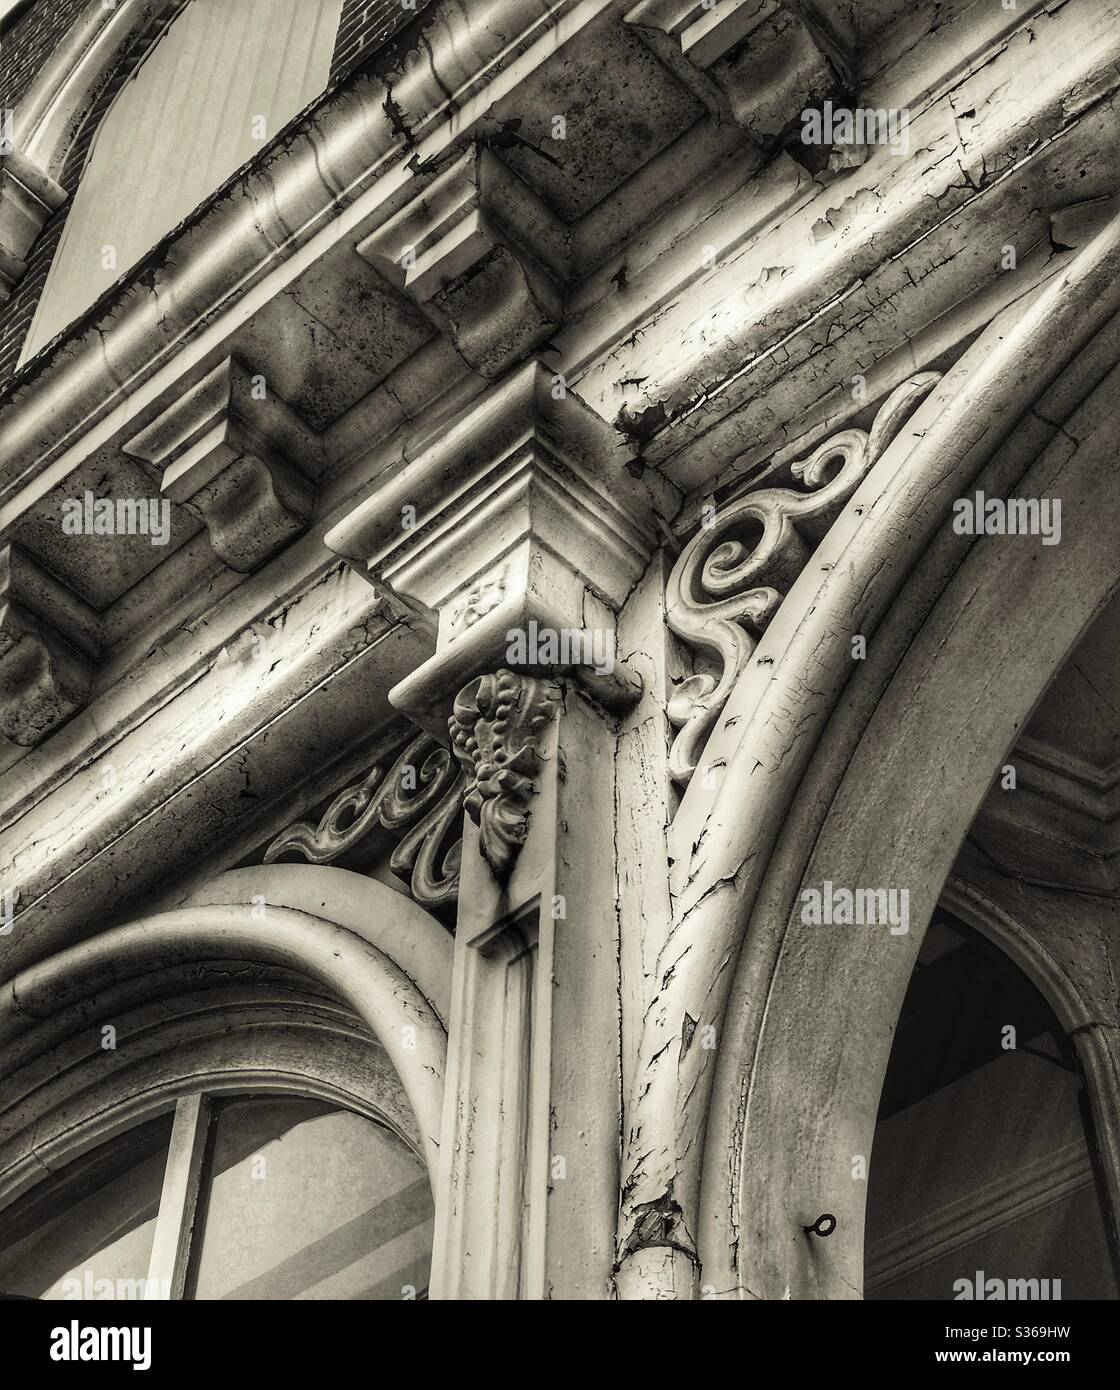 Ornate architectural details on an old building Stock Photo